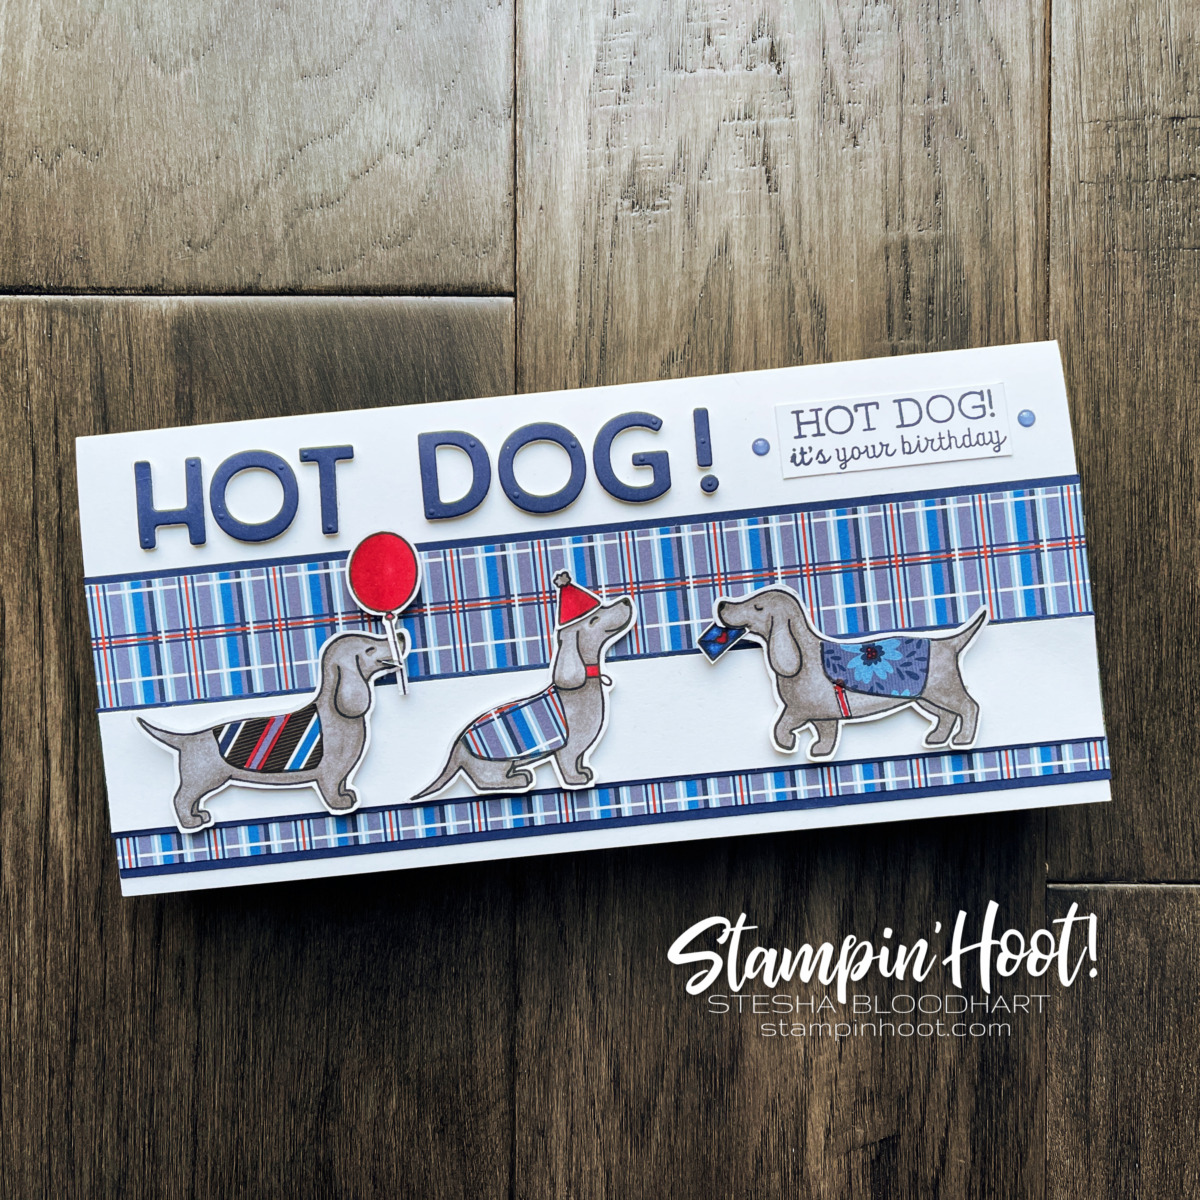 Hot Dog Stamp Set from Stampin' Up! Card by Stesha Bloodhart, Stampin' Hoot! Childrens Birthday Be Inspired